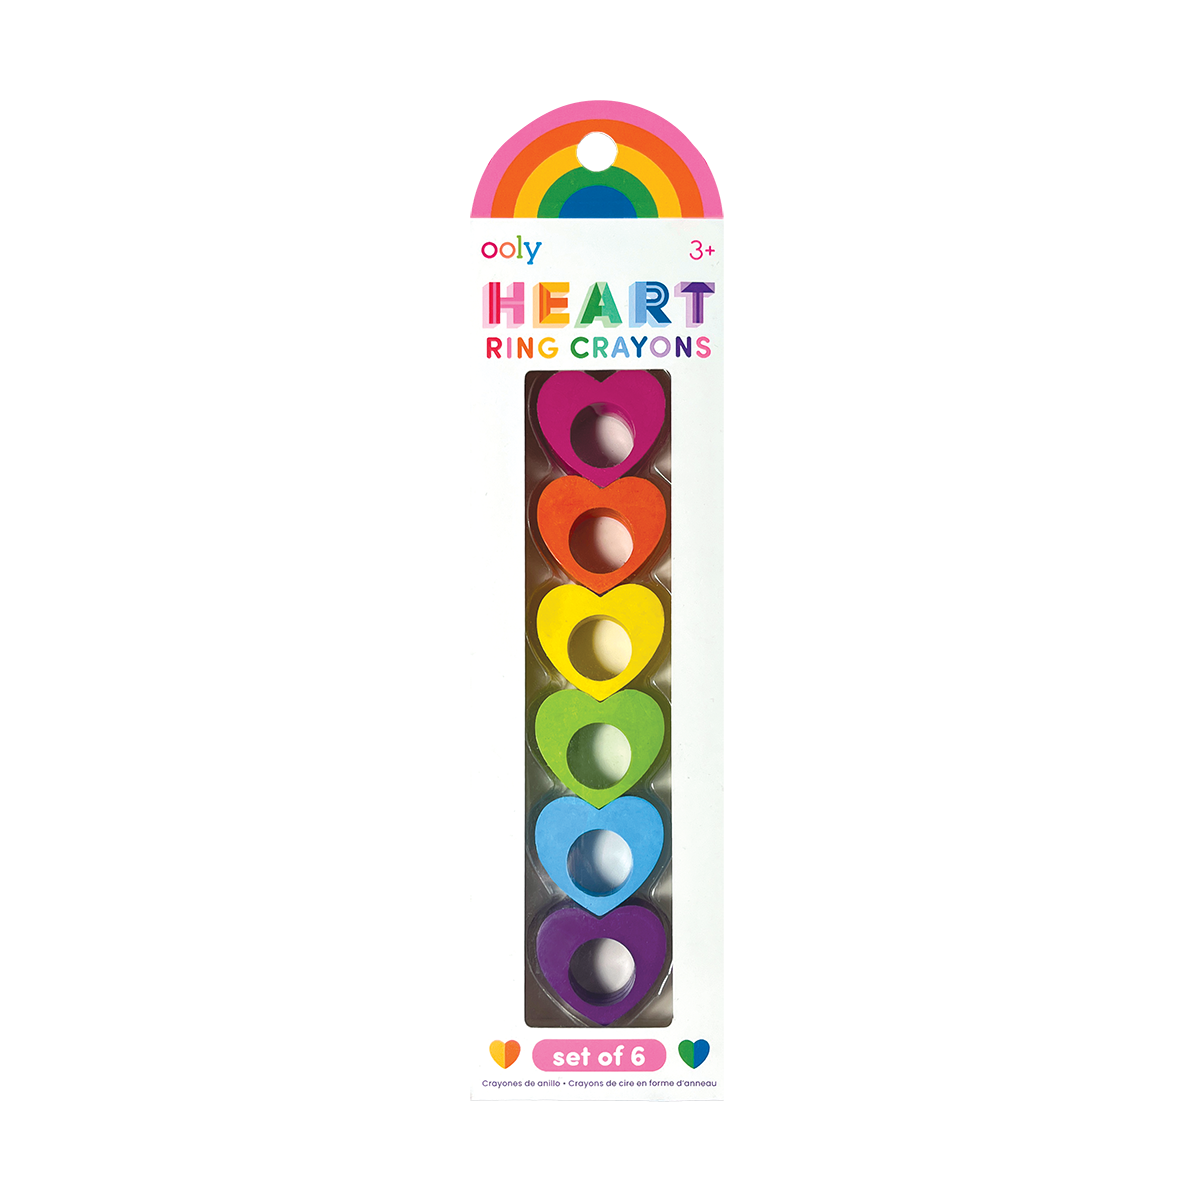 OOLY Heart Ring Crayons in packaging